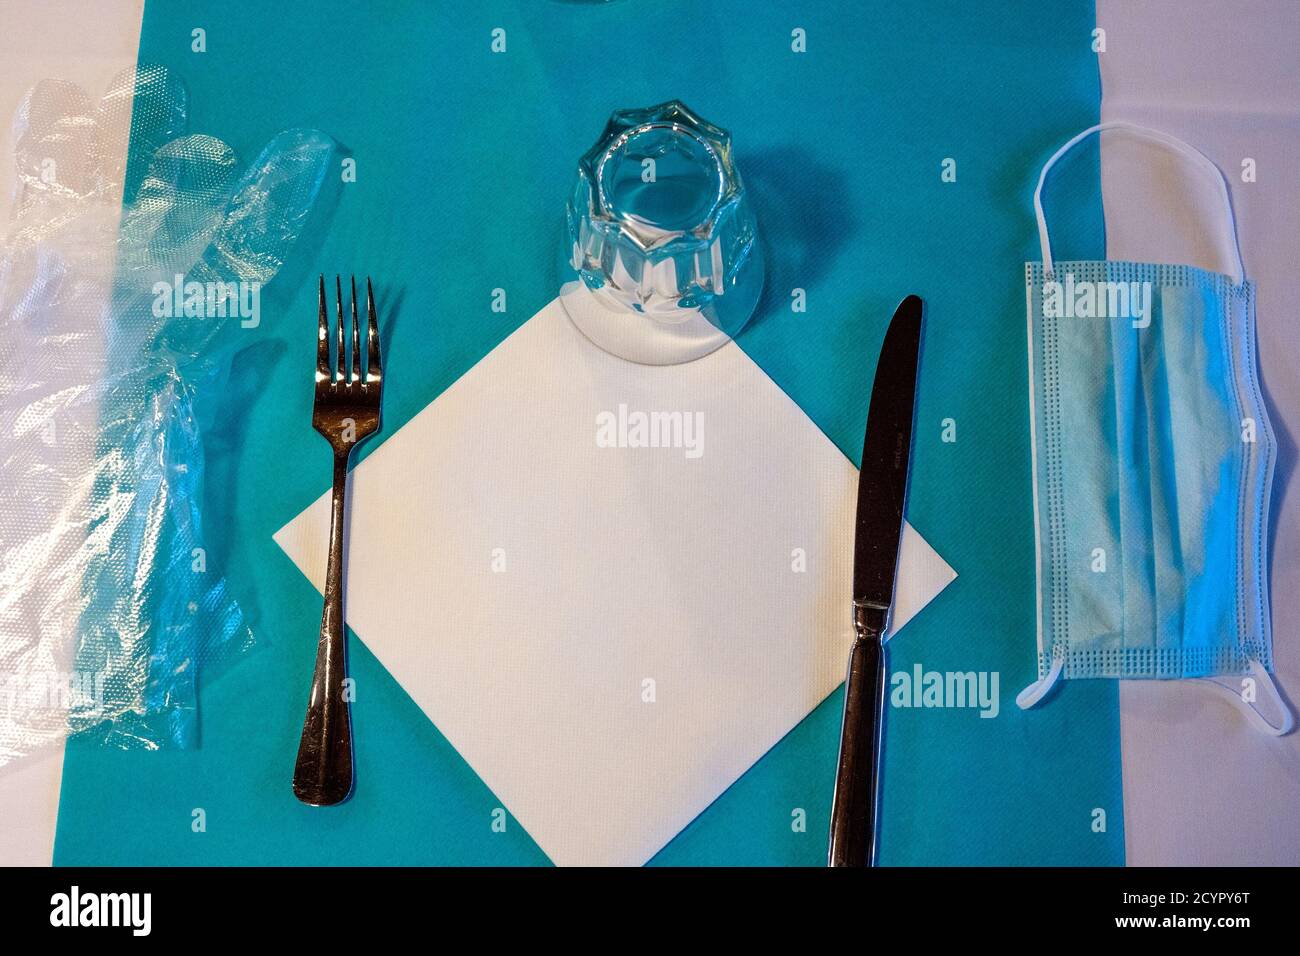 Table setting at the hotel on the french riviera. wearing a mask and gloves to take a food in the buffet is required. Hight quality photo Stock Photo